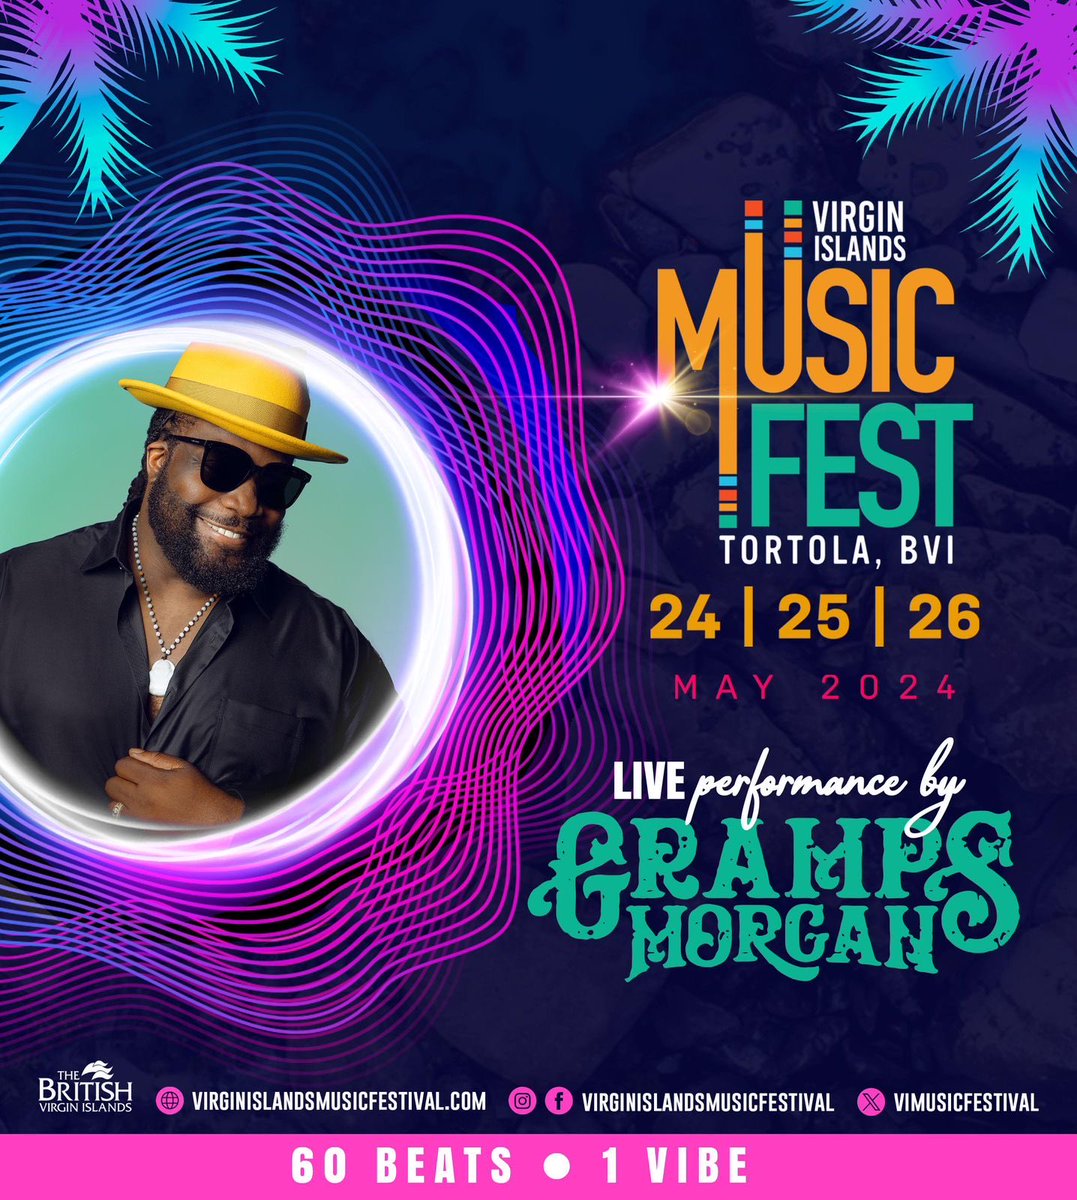 TORTOLA I’LL SEE YOU SOON EXCITED FOR THE 26TH ⁦@BVIMusicFest⁩ ⁦@dadasonent⁩ ⁦@iamjemere⁩ ⁦@iiampriel⁩